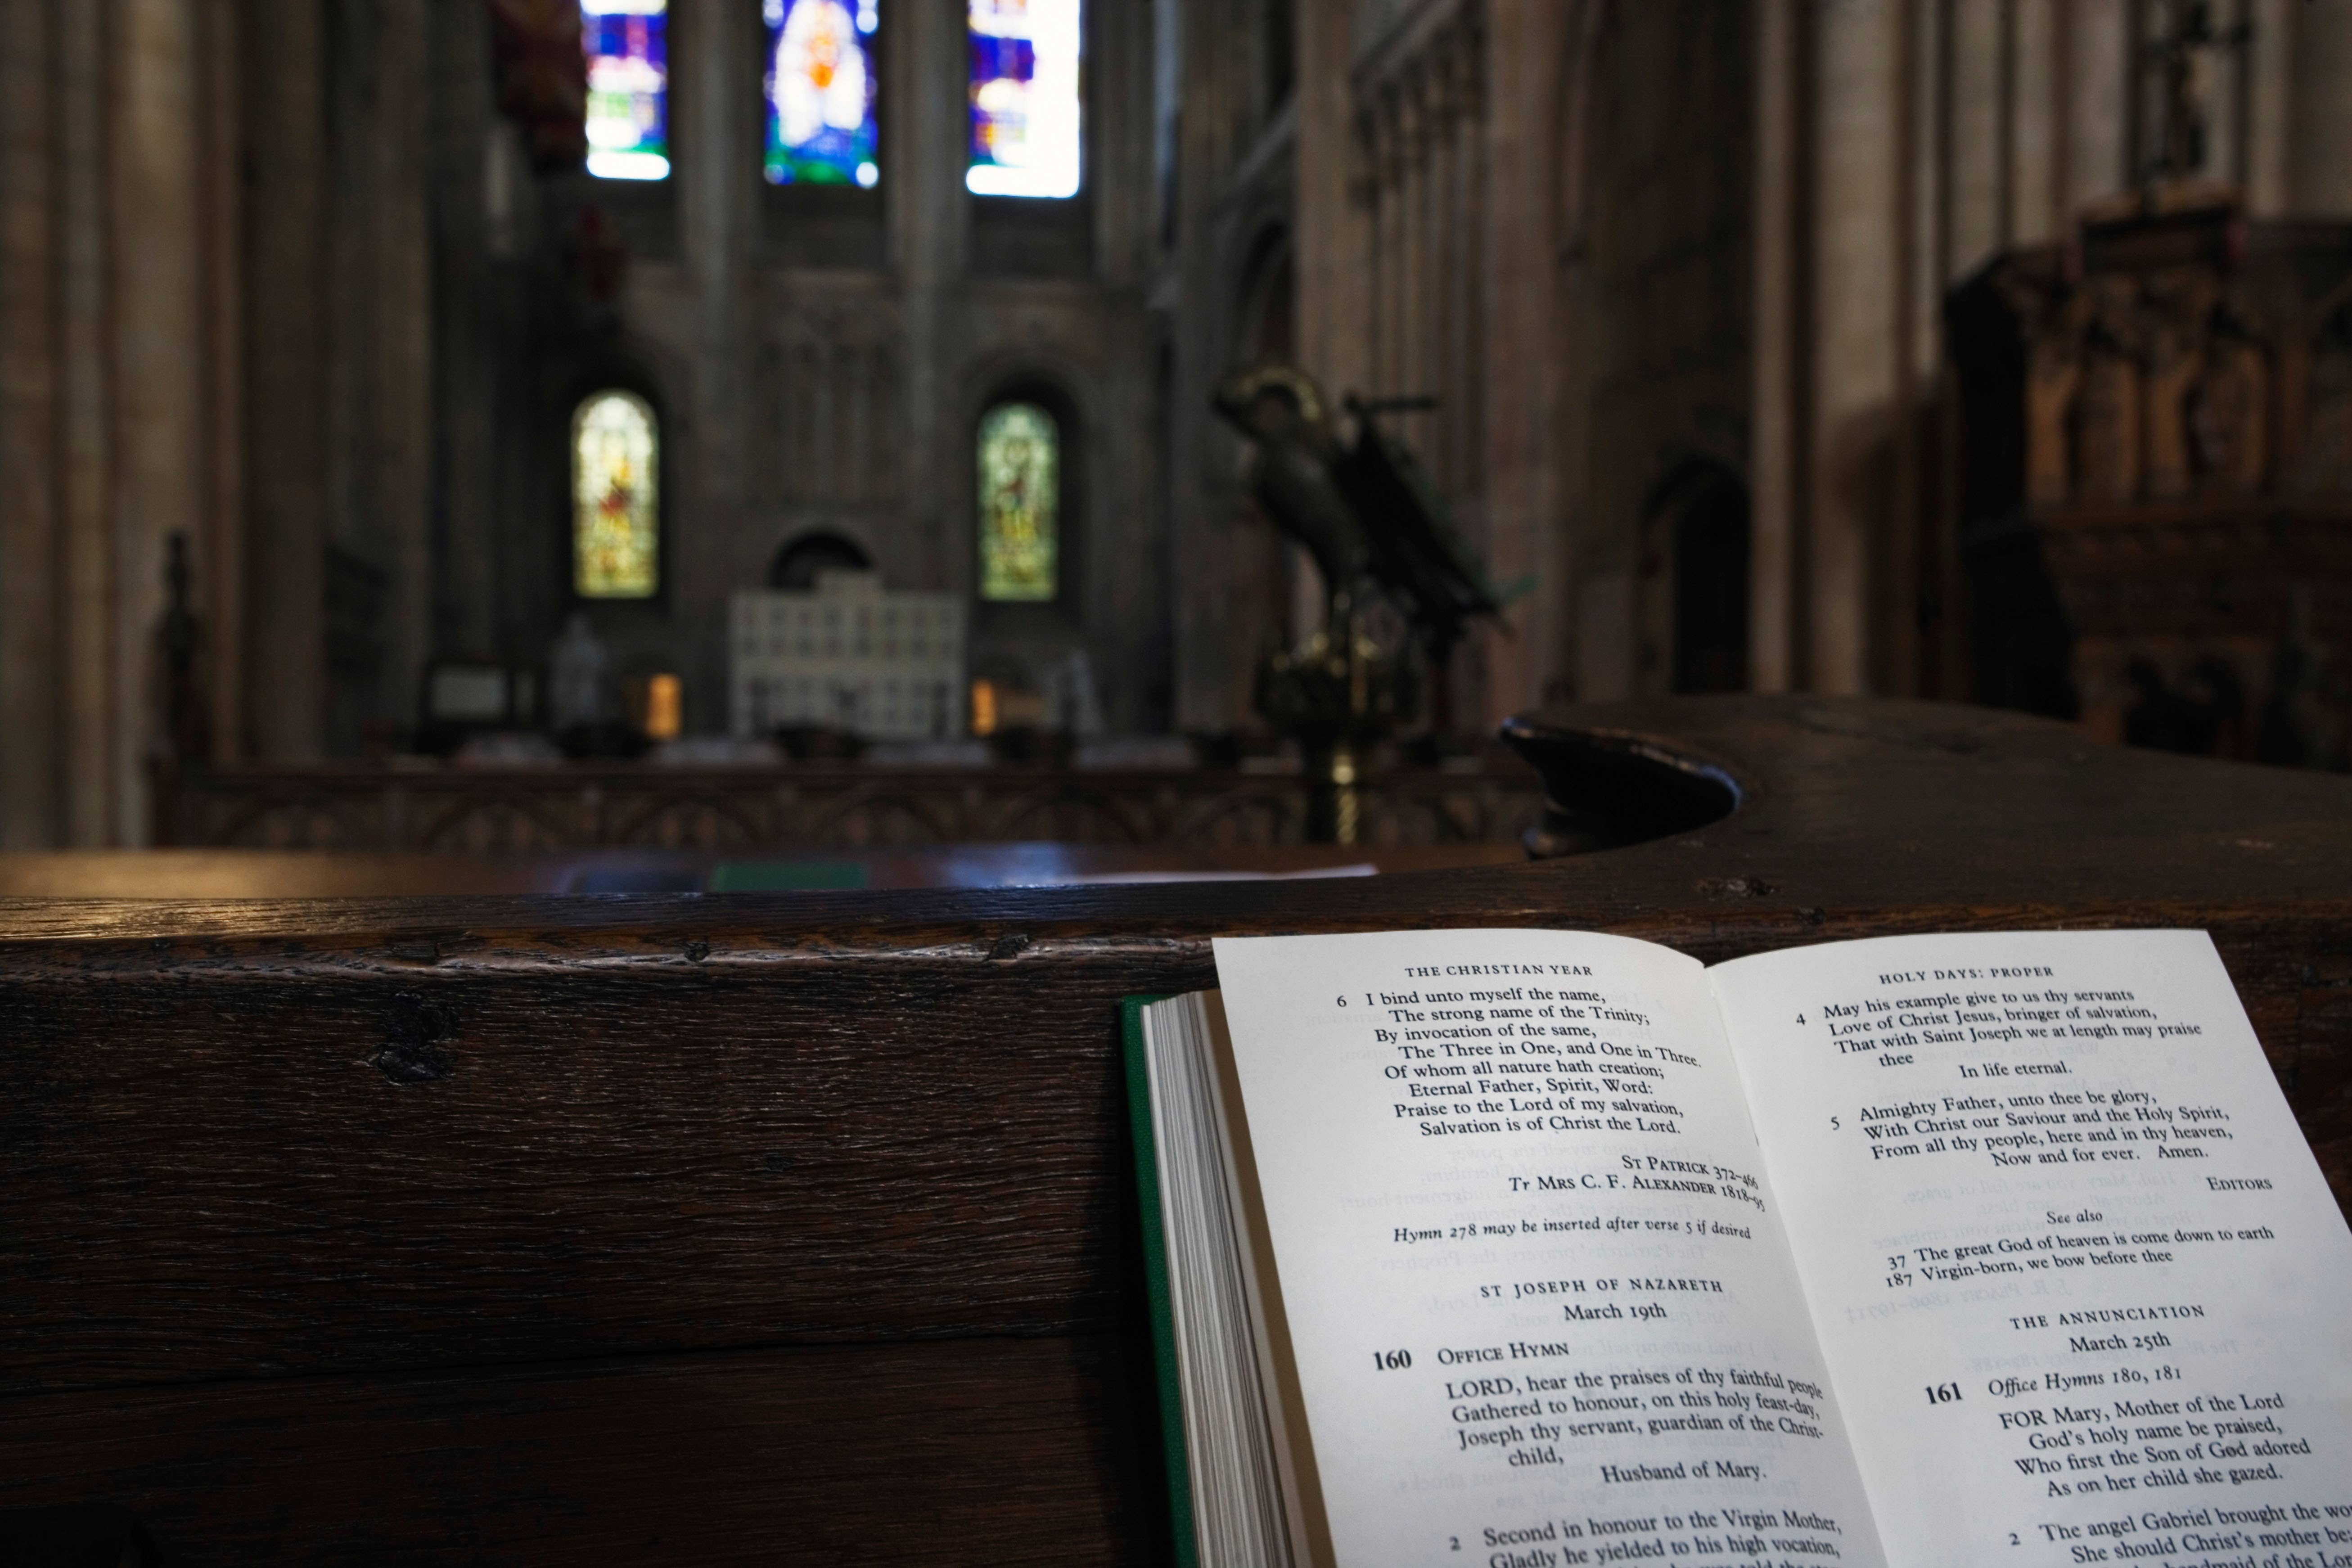 Less than half of England and Wales’s population identify as Christian, census figures have revealed for the first time, prompting calls for the role of religion in society to be reconsidered (Tim James/Mabel Gray/Alamy/PA)